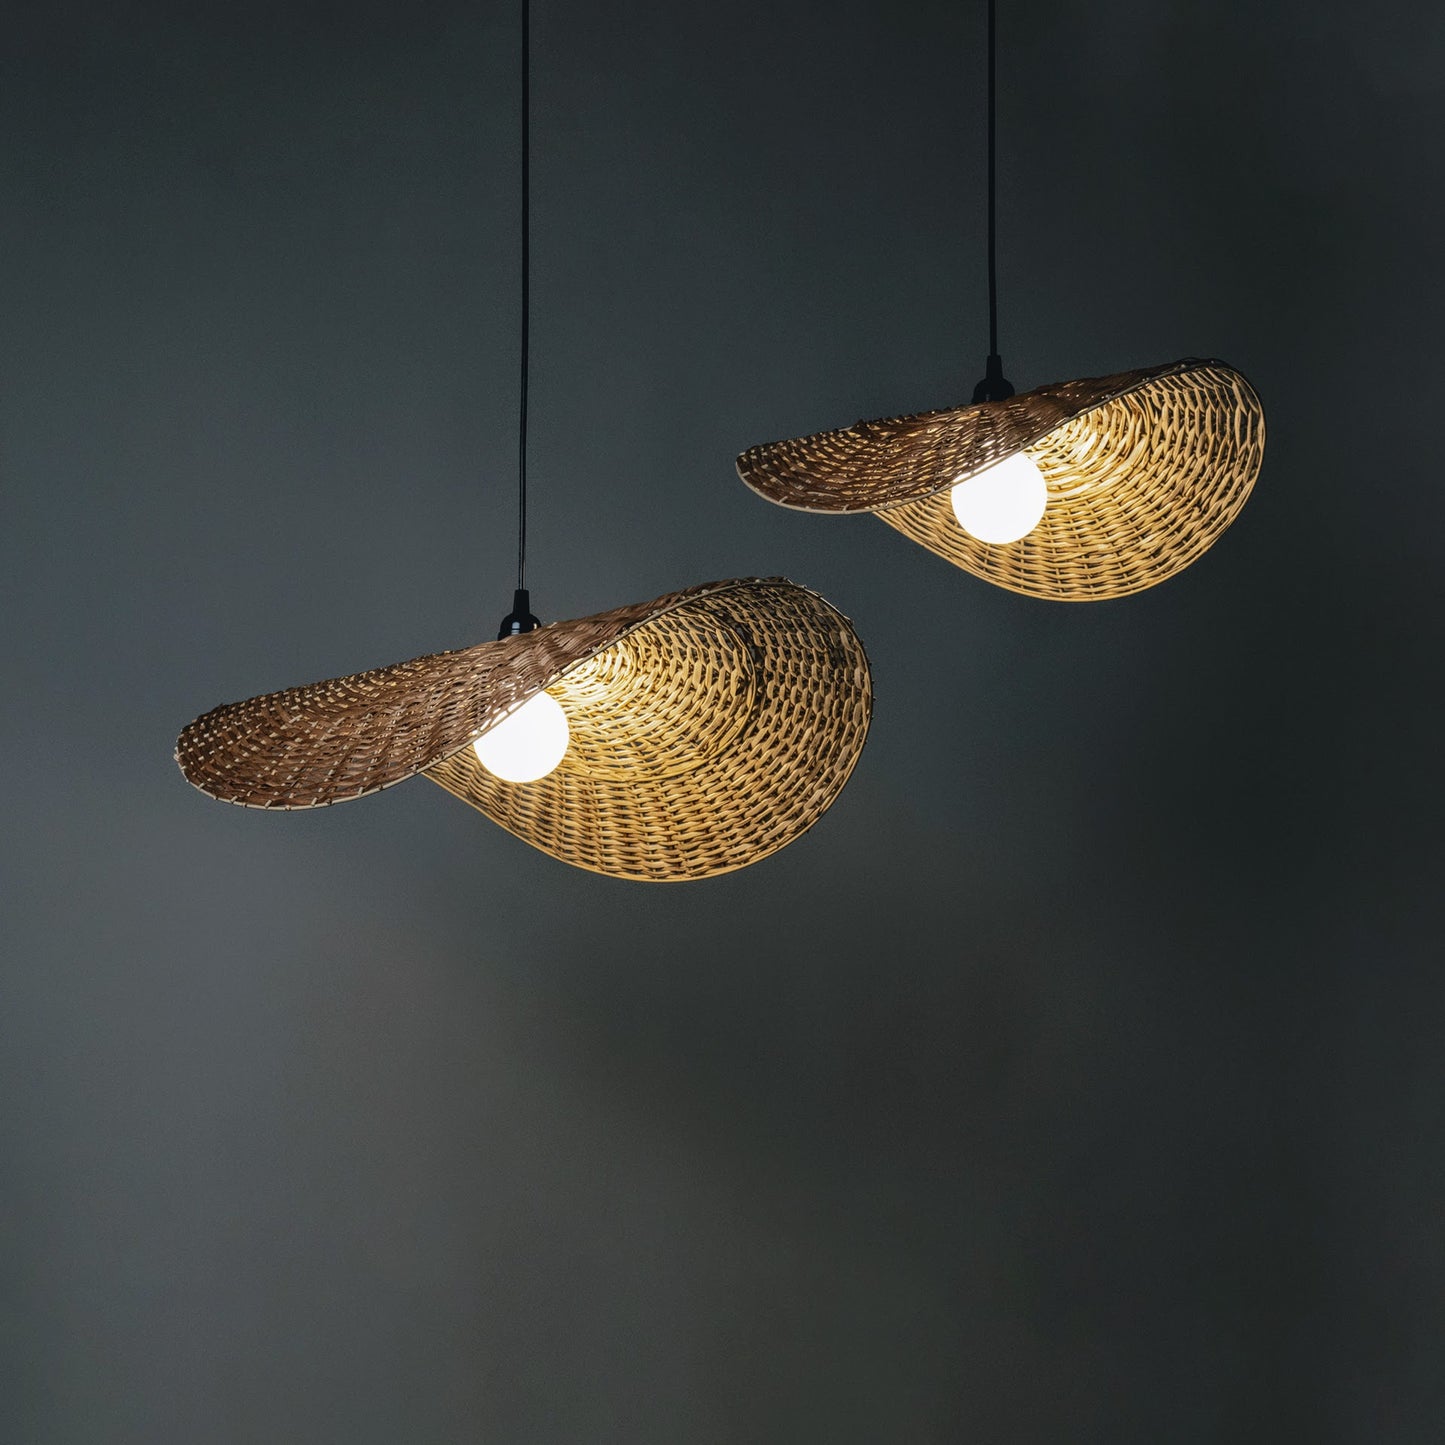 Ooas Lamp -Unique Willow Wicker Handmade Woven Hanging Pendant Lamp Home Cafe Restaurants Decor [Sizes - 600mm/450mm]